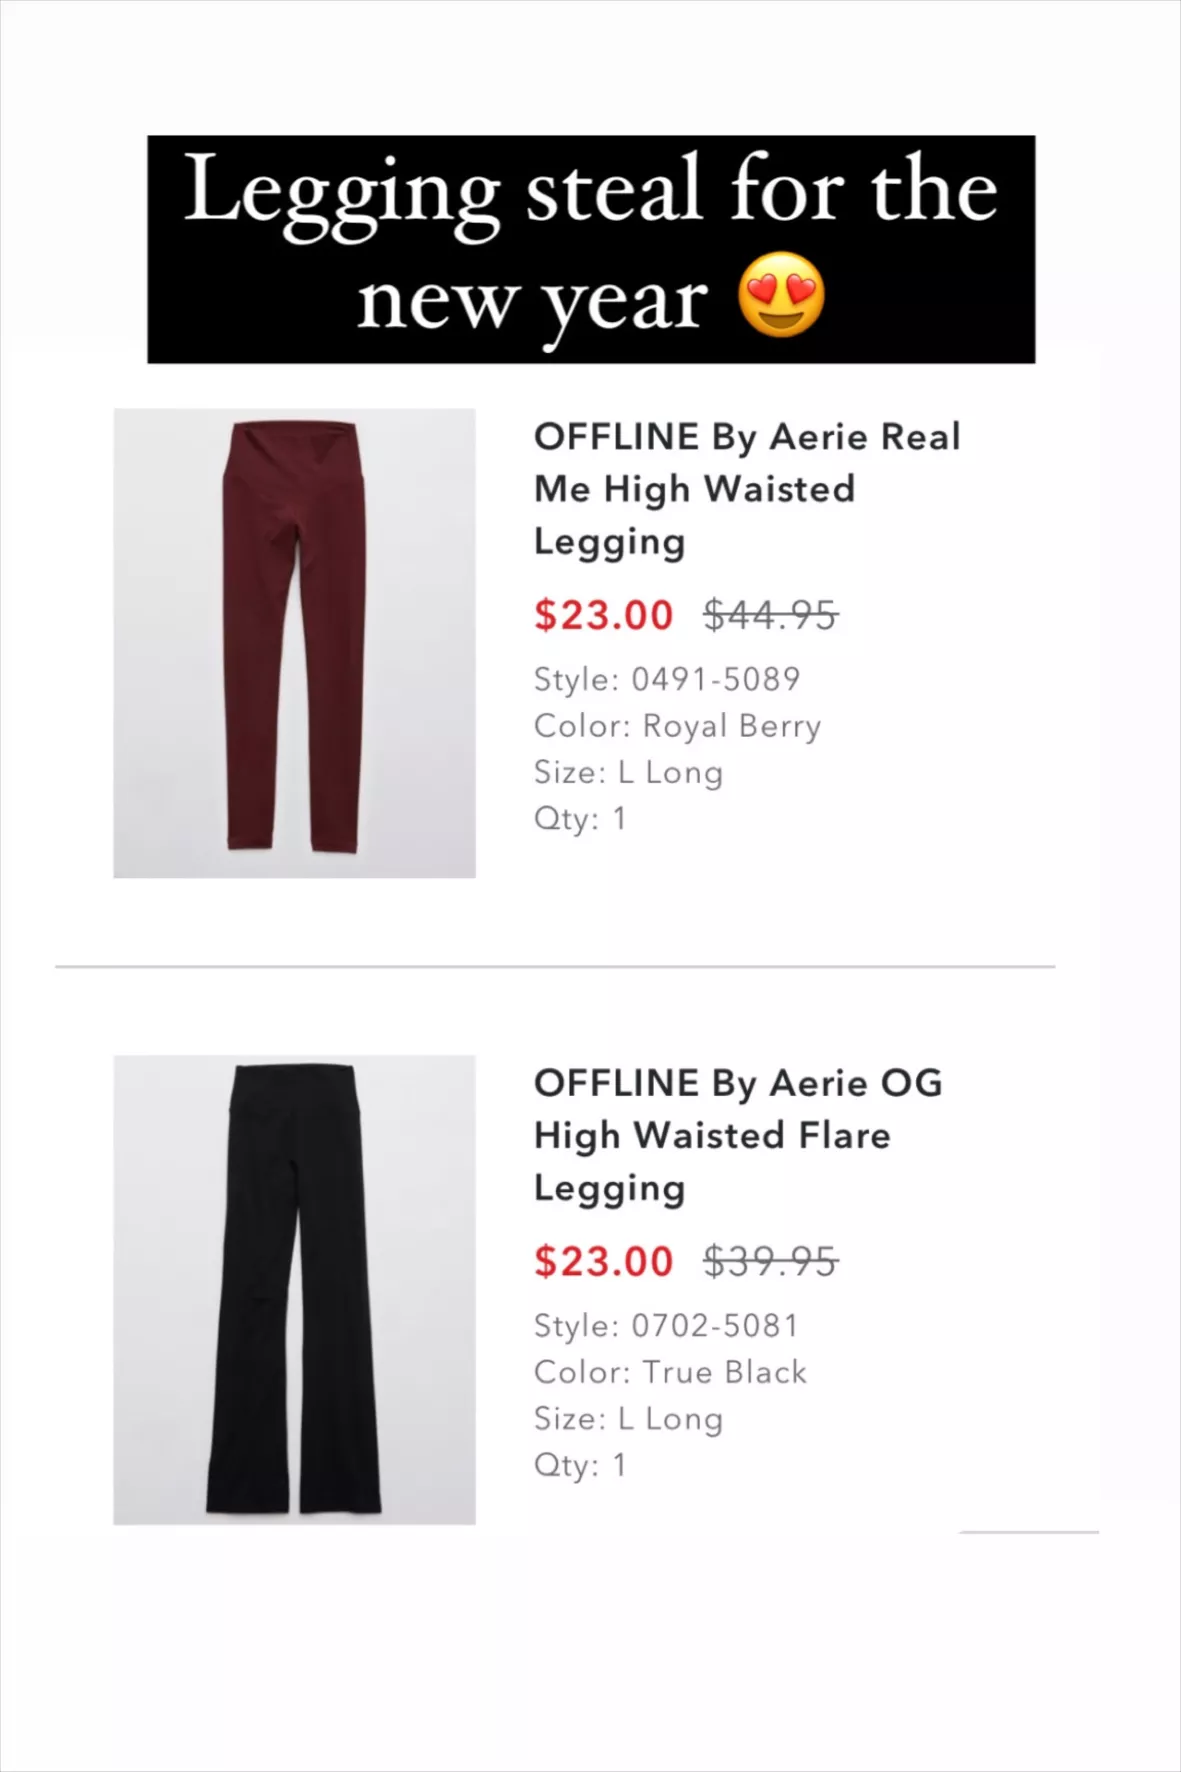 high OFFLINE By Aerie Real Me High Waisted Crossover Super Flare Legging